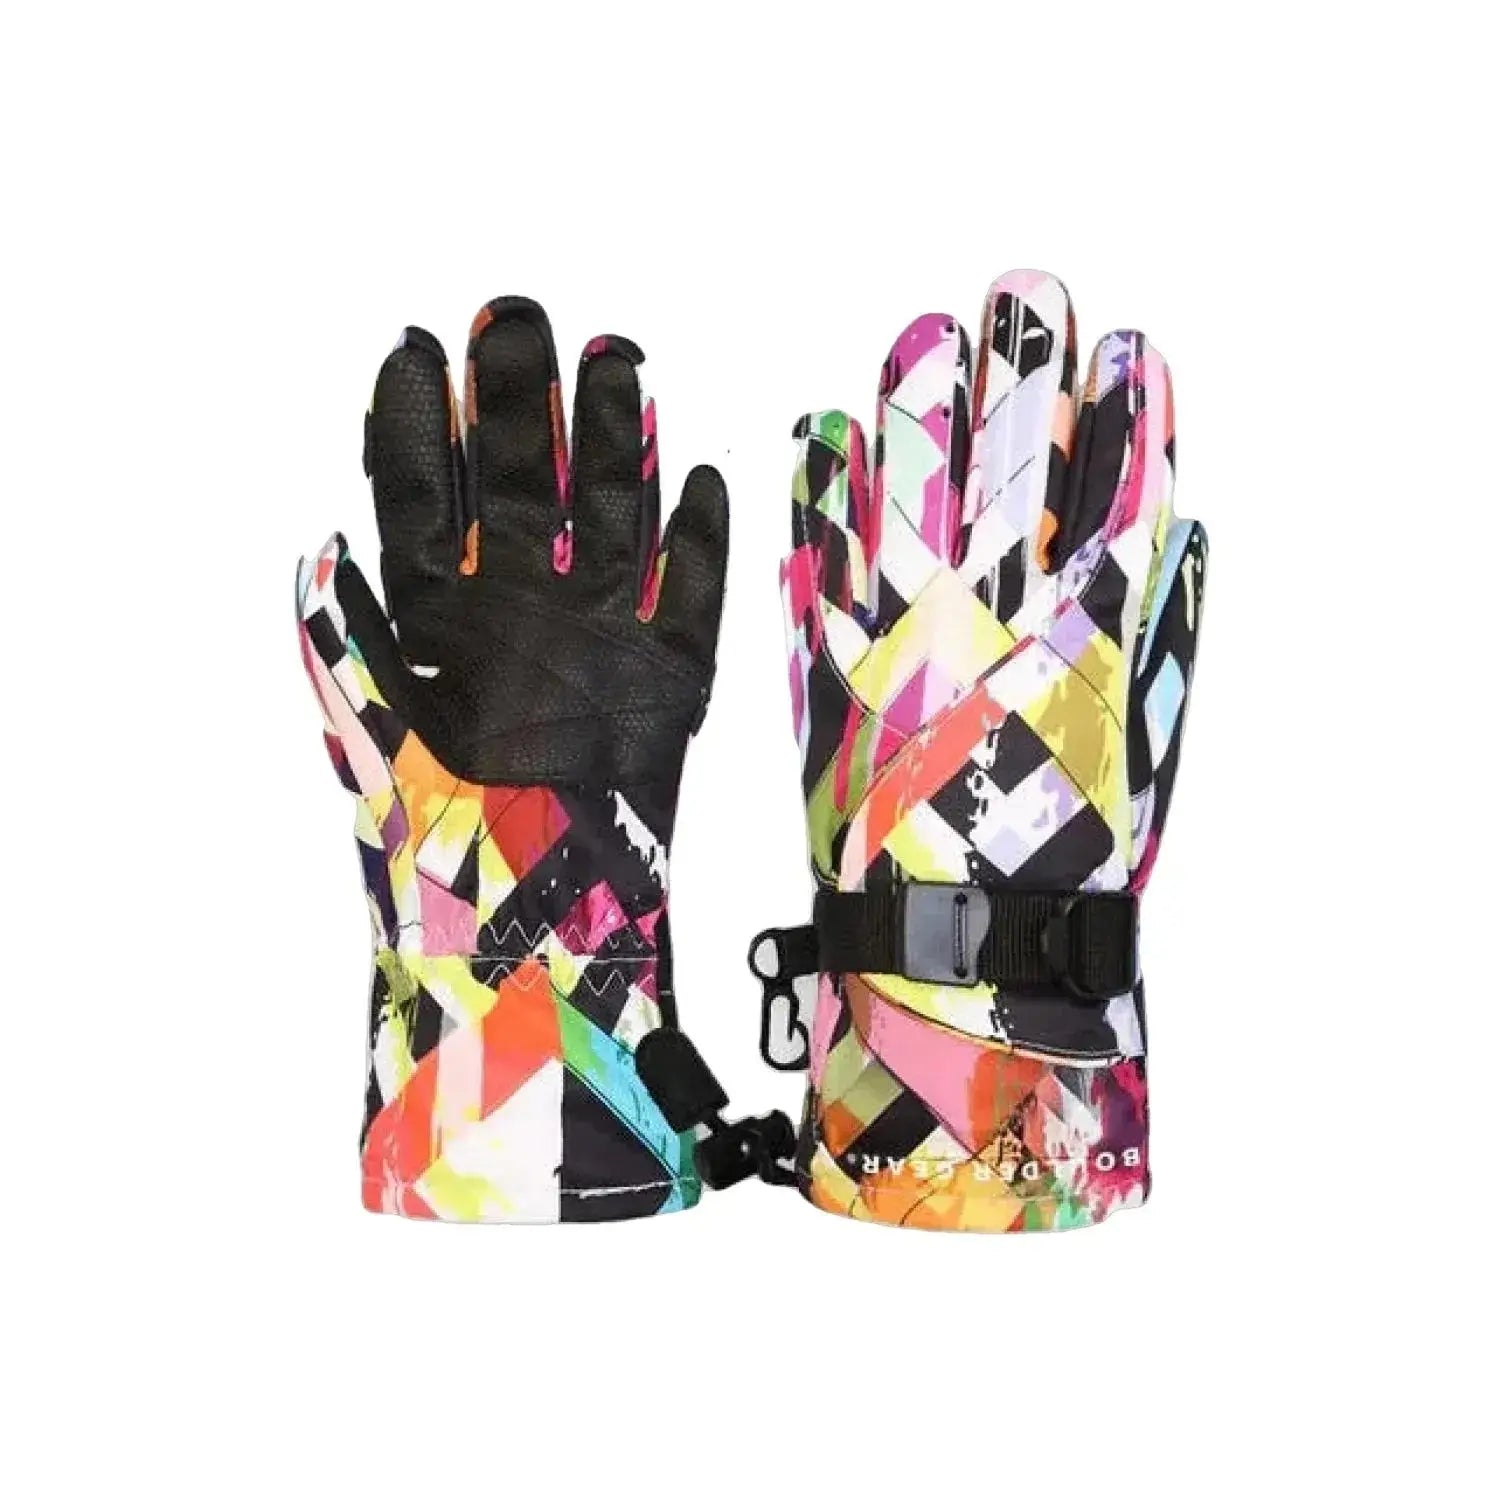 Boulder Gear Mogul II Gloves in Miss You. Pink, red, orange, teal, black, white, yellow, and blue geometric pattern.